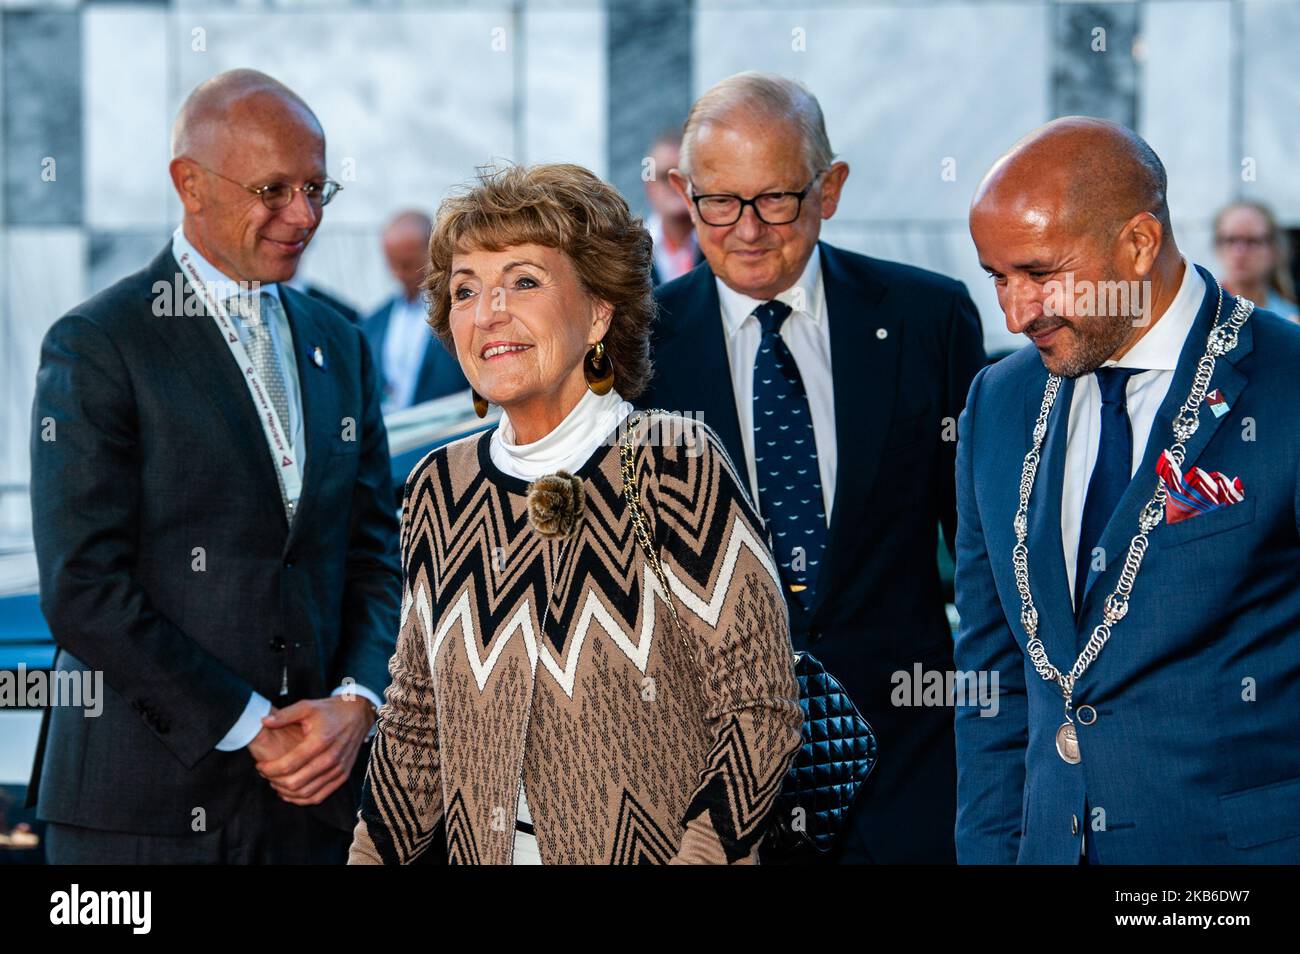 Princess Margriet of the Netherlands and her husband Pieter van Vollenhoven Jr. are seen being received to the 75th anniversary of the Battle of Arnhem ceremony, by Mayor of Arnhem, Ahmed Marcouch, in Arnhem on September 20th, 2019. (Photo by Romy Arroyo Fernandez/NurPhoto) Stock Photo